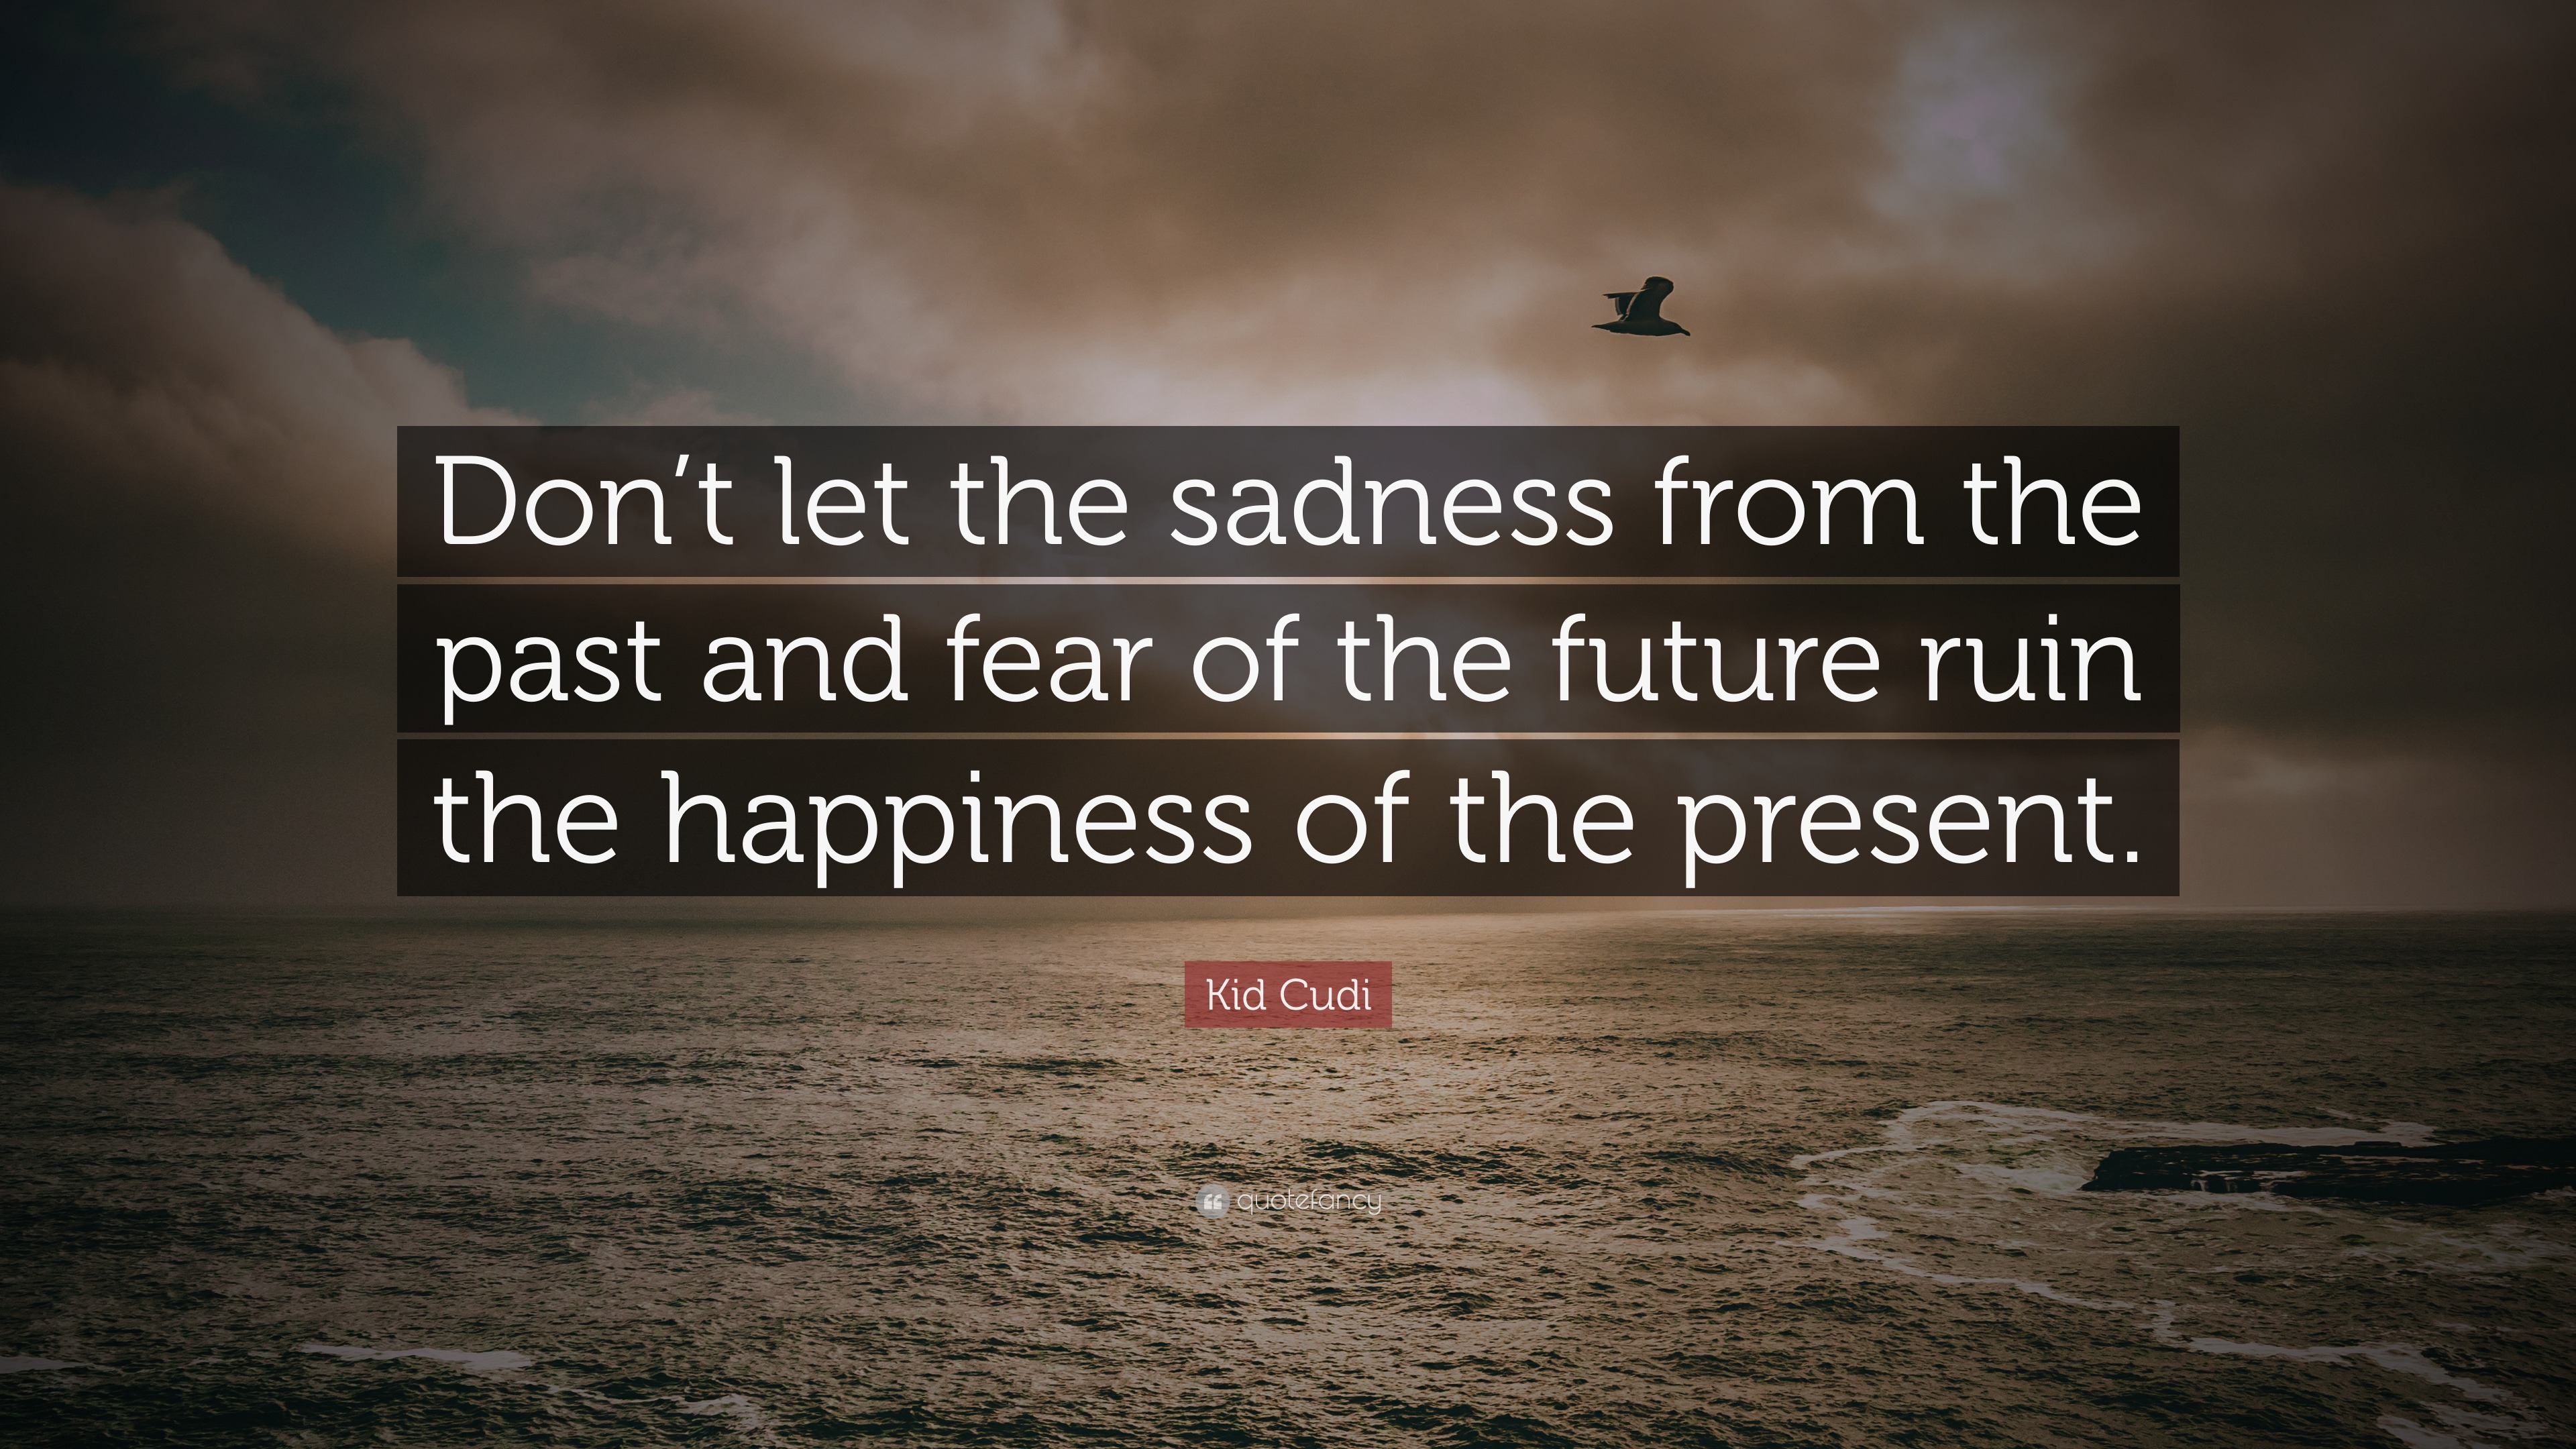 Kid Cudi Quote: “Don’t let the sadness from the past and fear of the ...